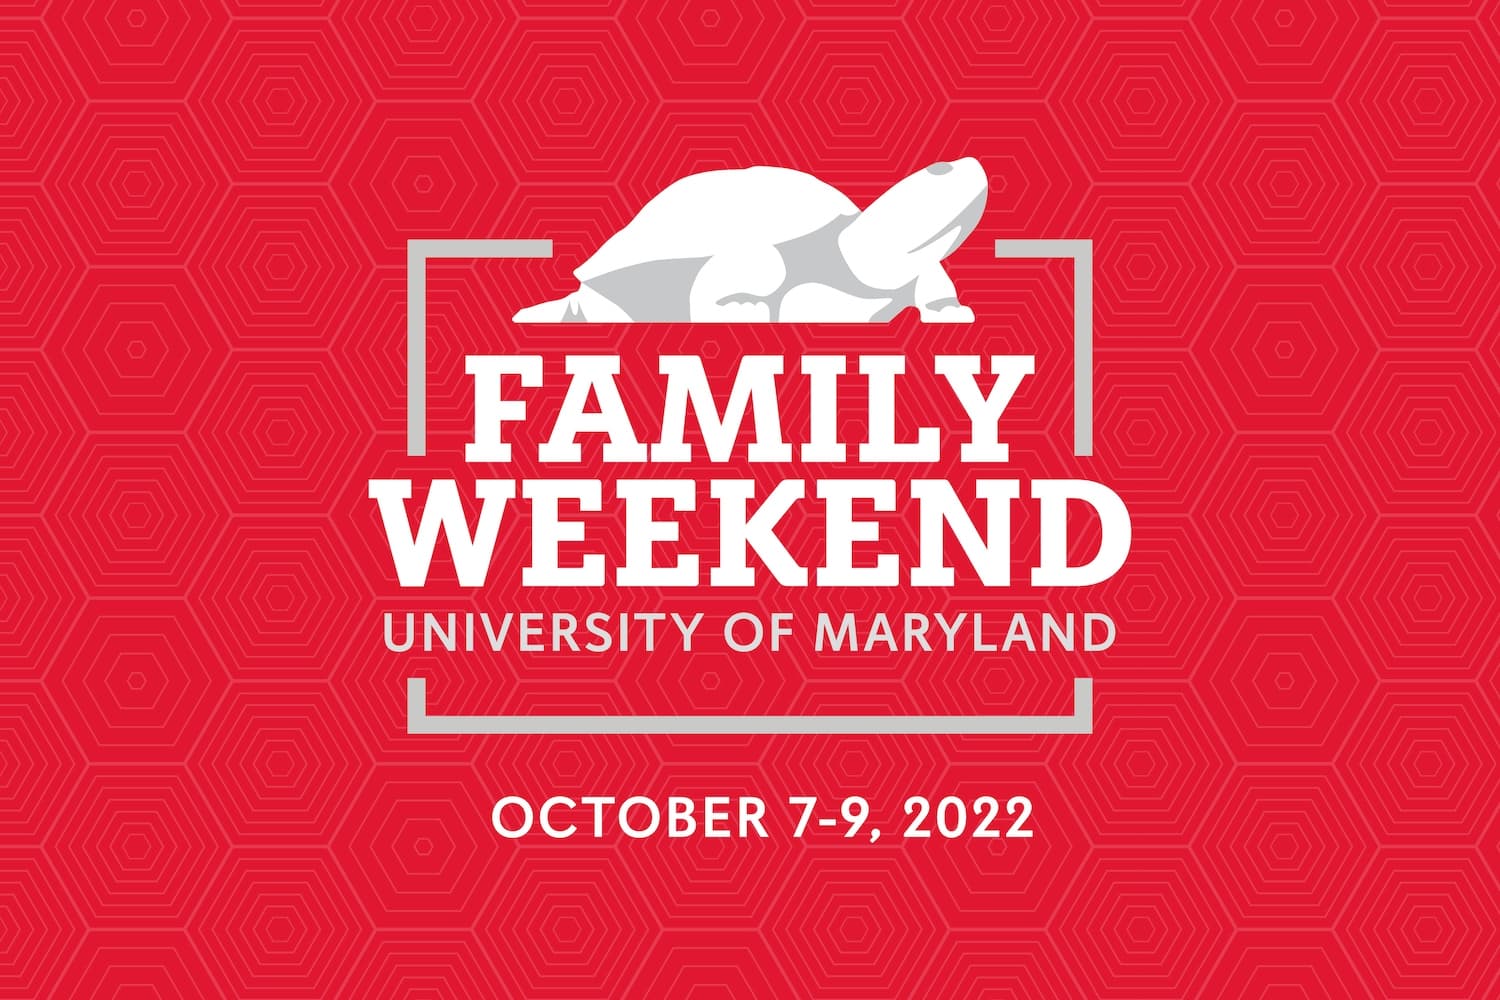 Red shell background, white testudo graphic with text: Family Weekend University Maryland October 7-9, 2022